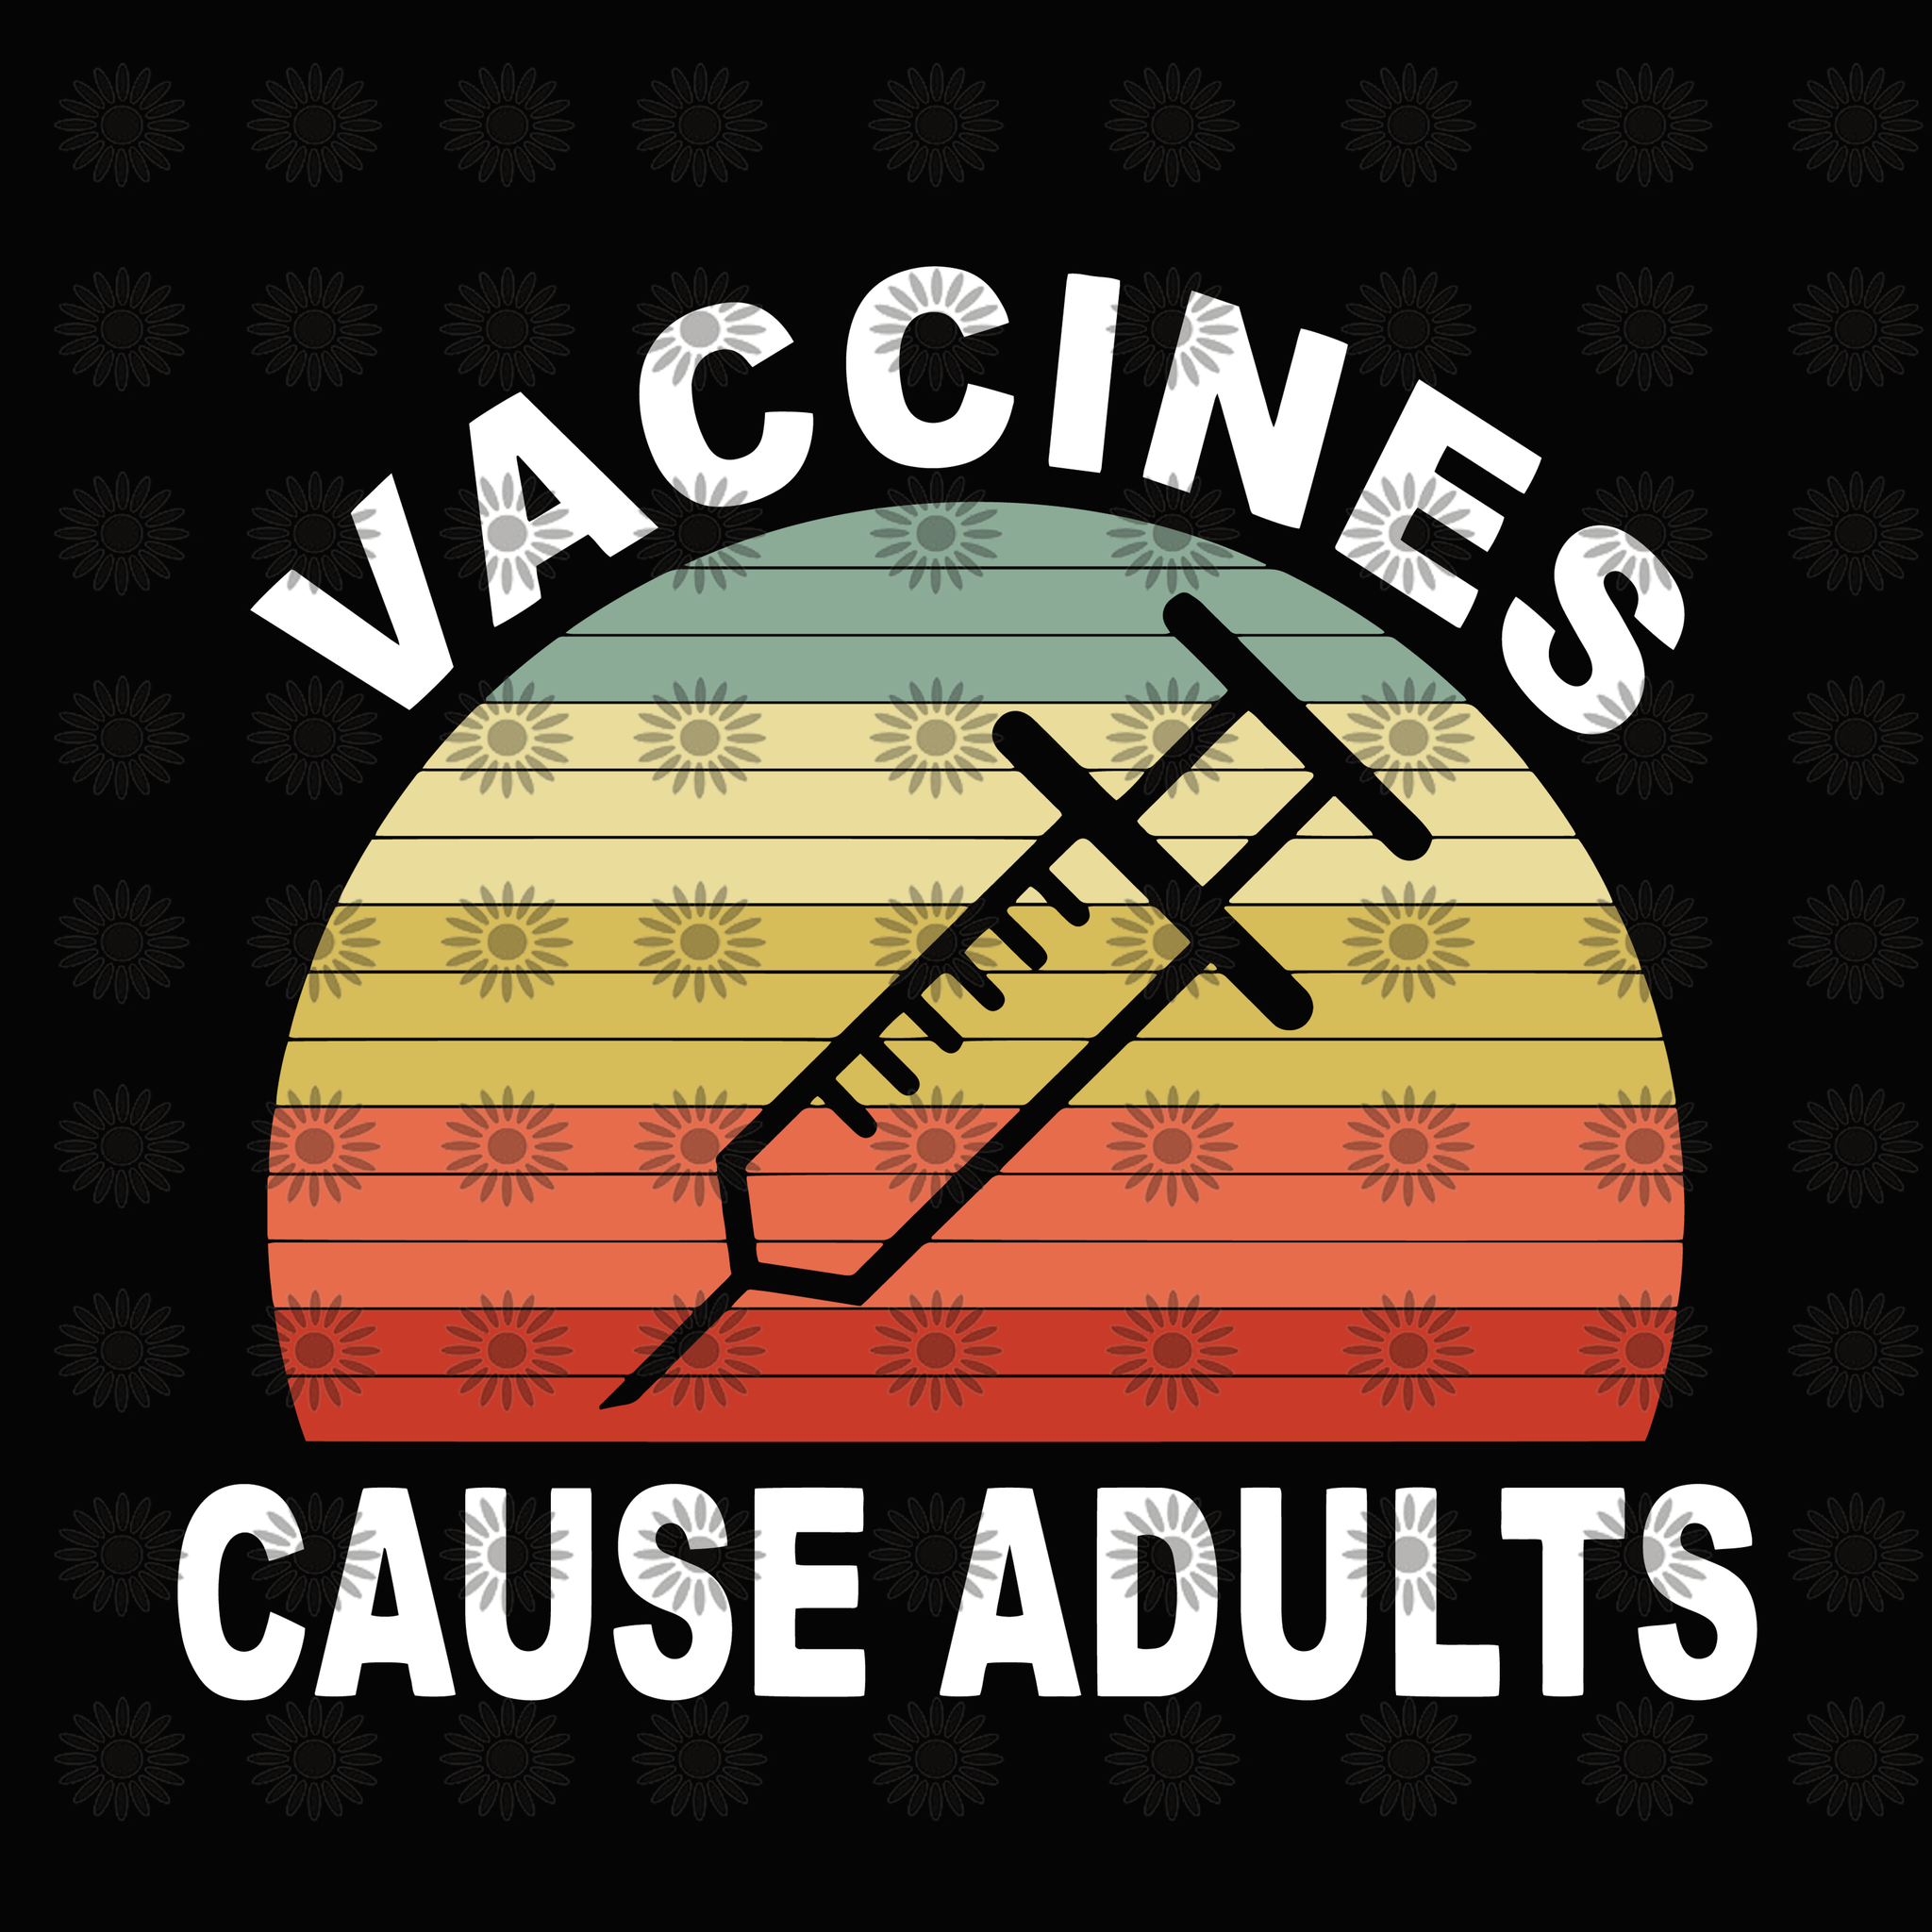 Vacciness cause adults svg, Vacciness cause adults, Vacciness cause adults design eps, dxf, png, svg file